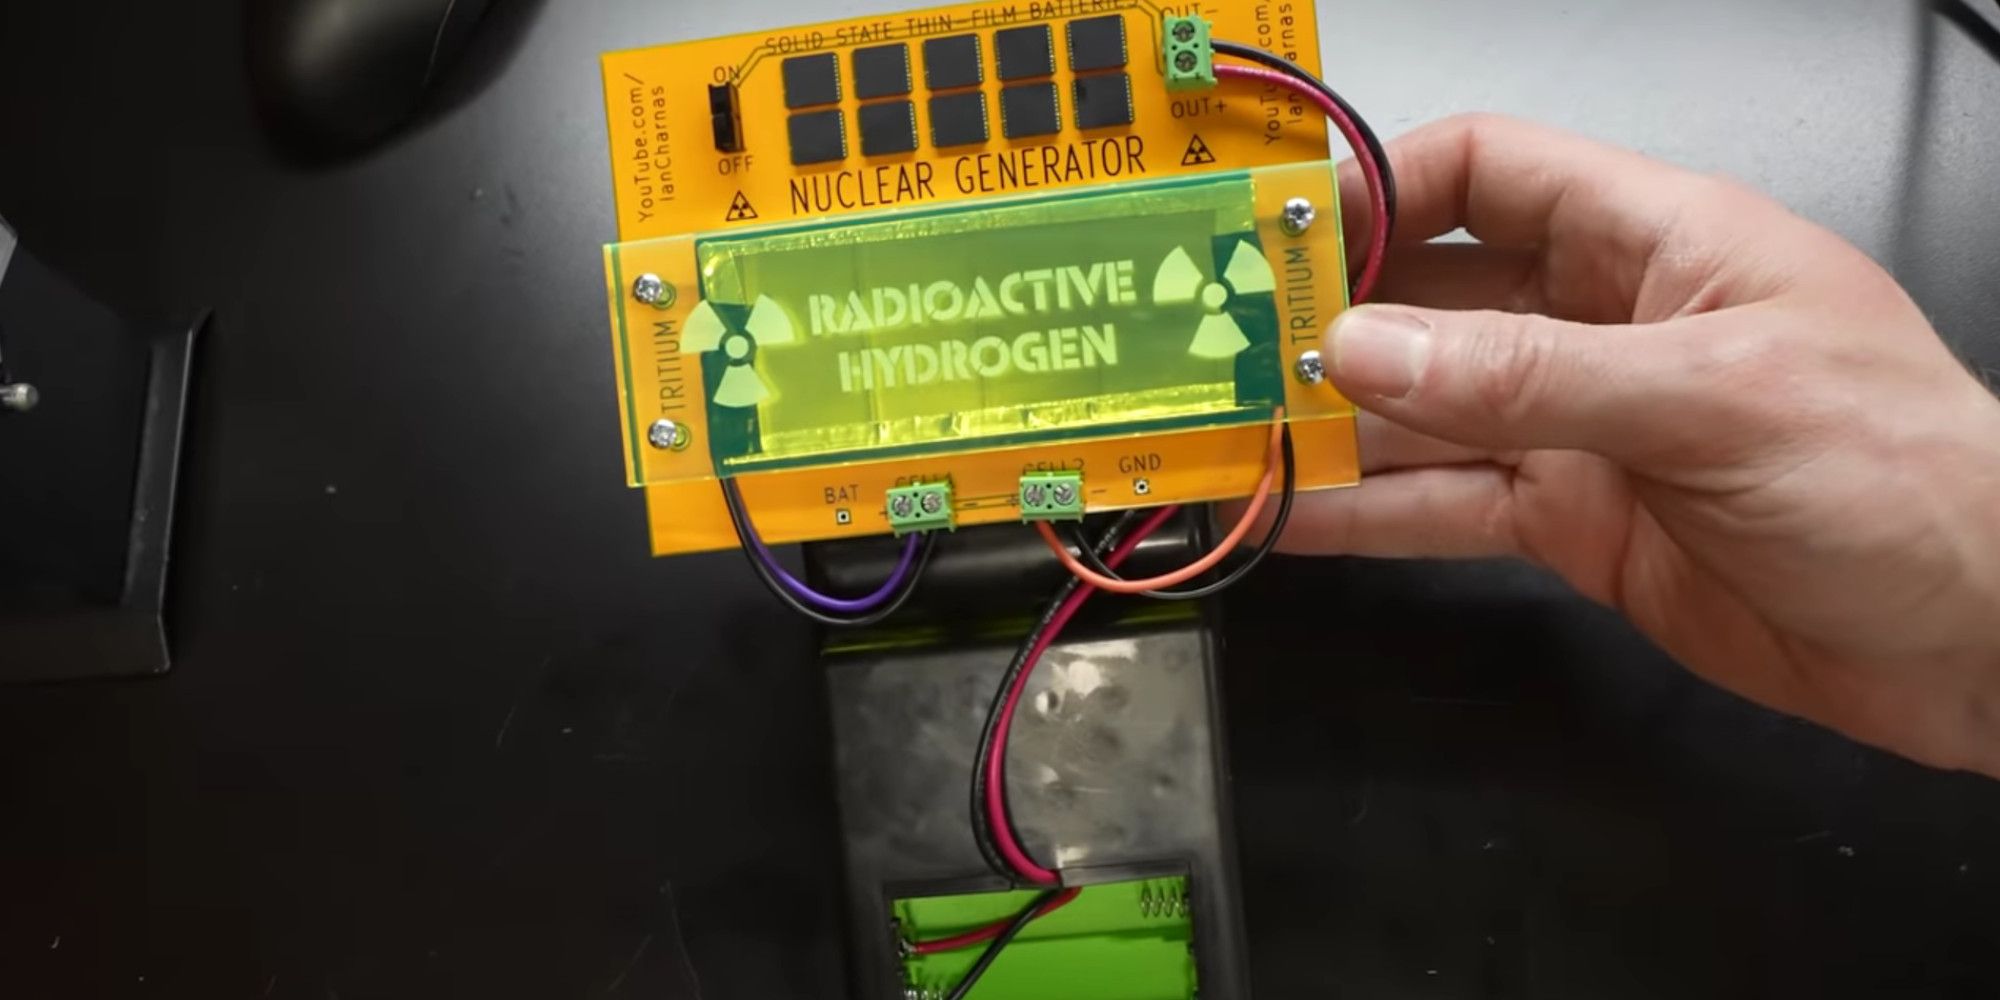 a nuclear powered gameboy battery consisting of tritium tubes and solid state batteries